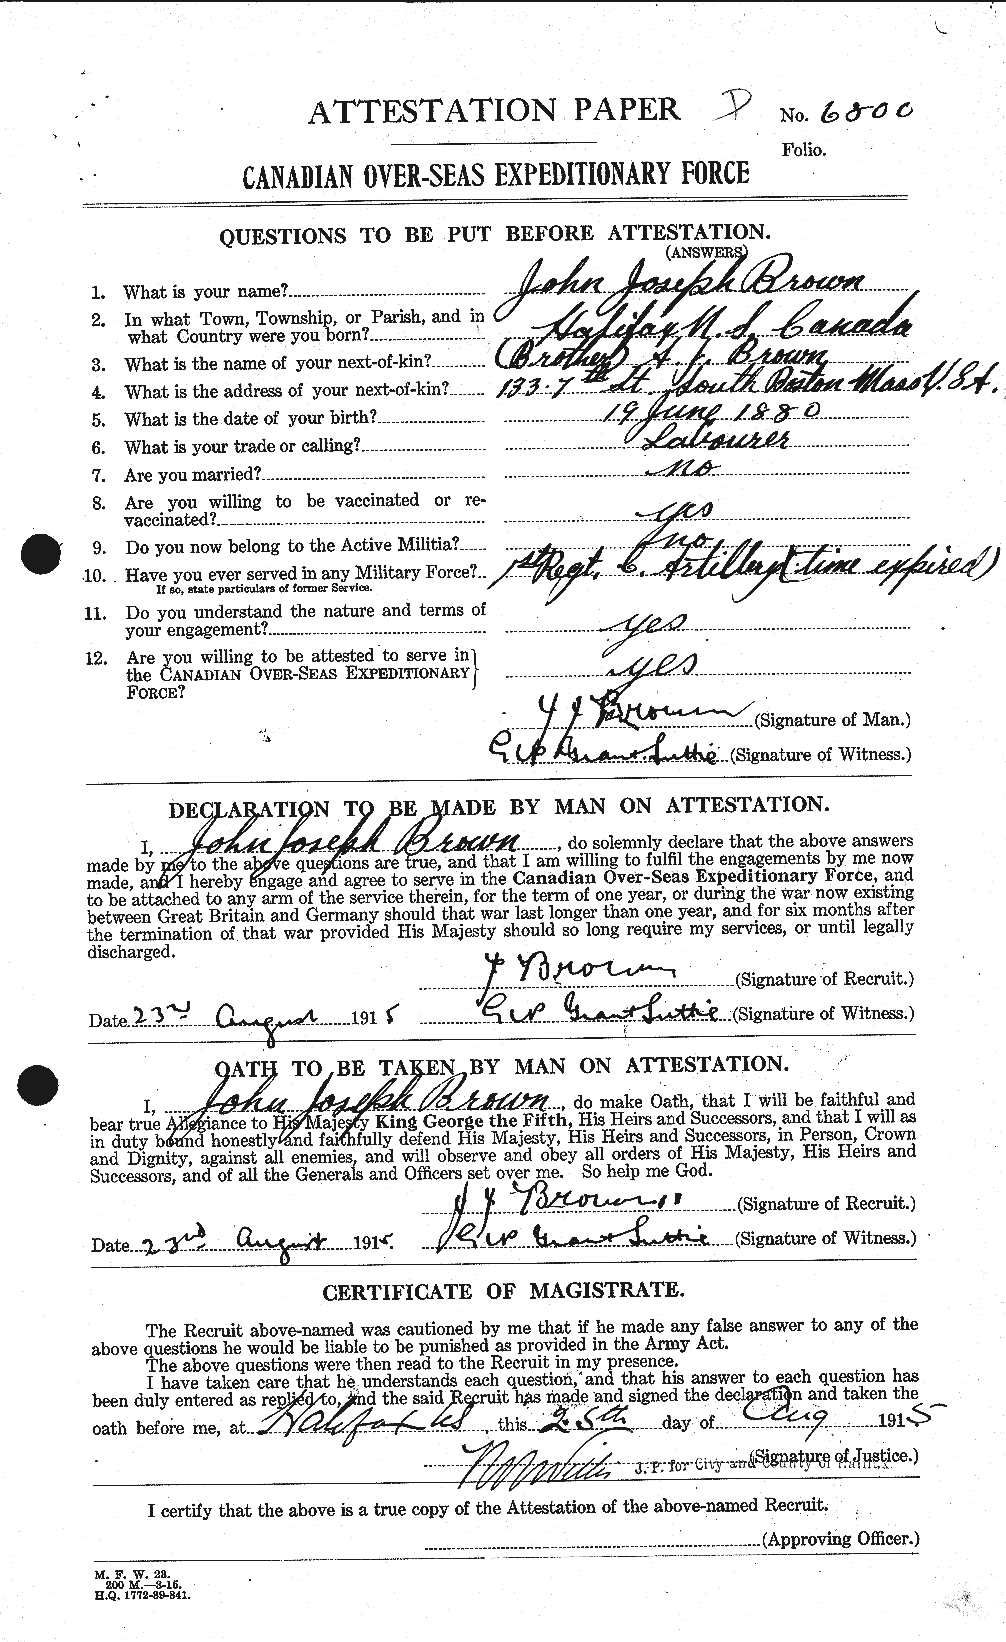 Personnel Records of the First World War - CEF 265822a